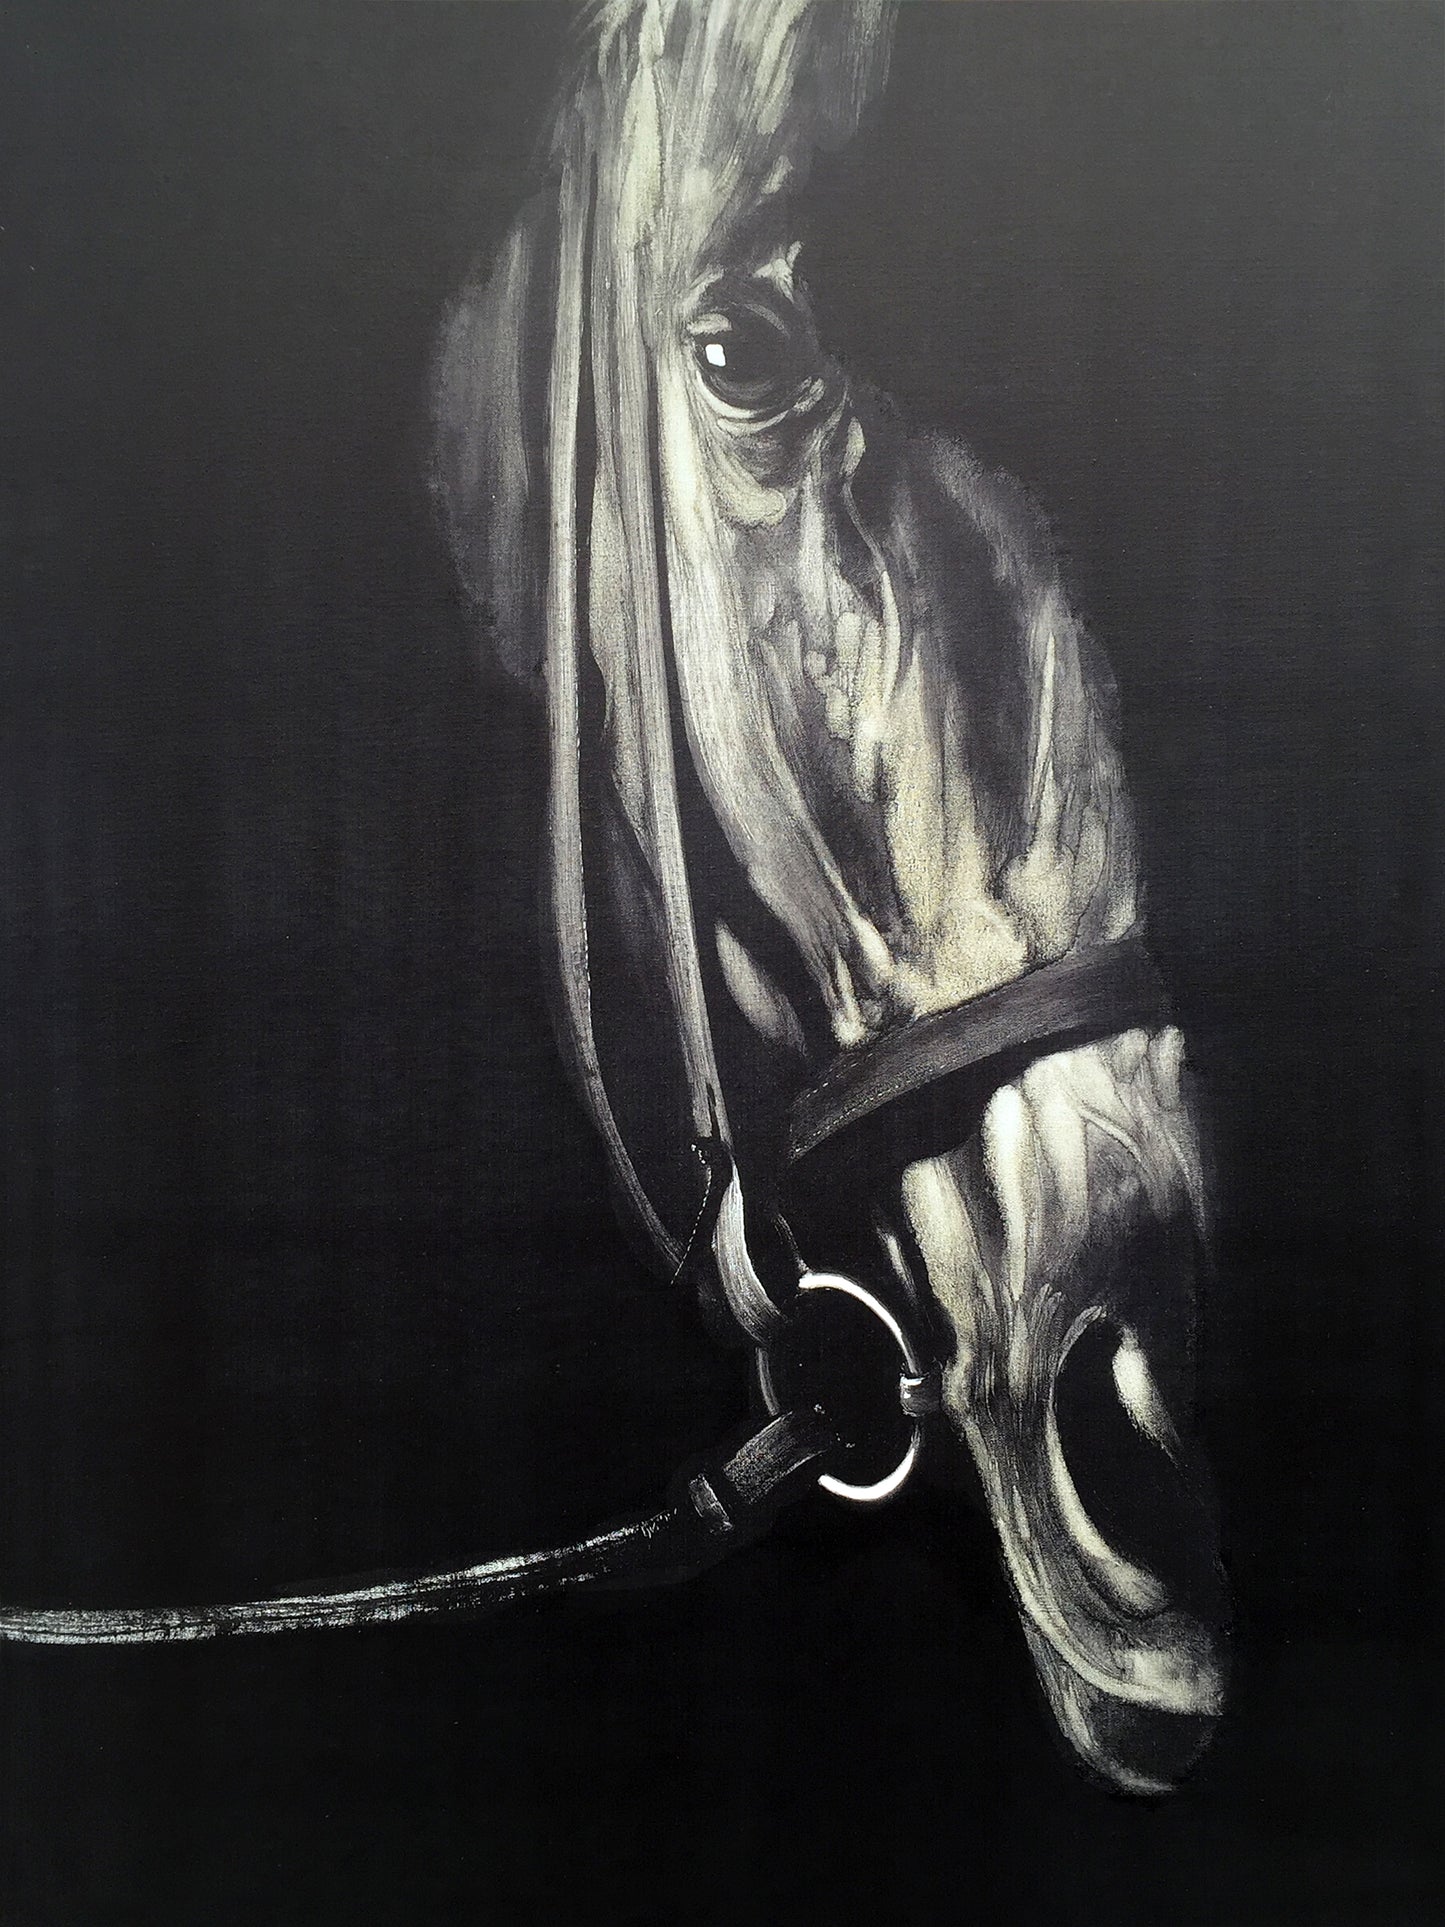 'Horse in the Dark IV' Oil Painting Print on Wrapped Canvas